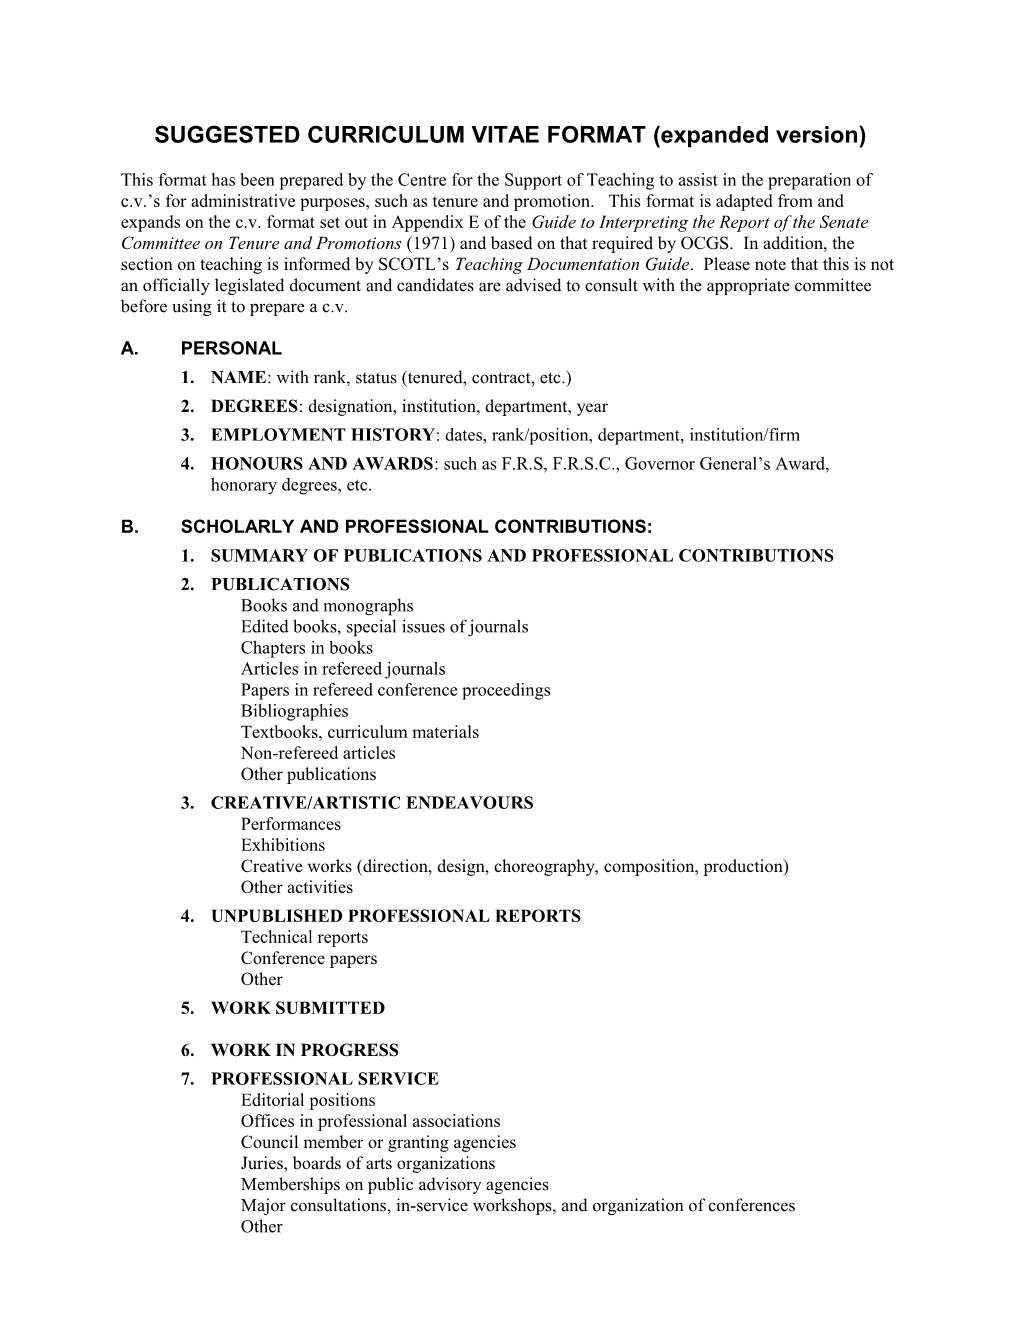 SUGGESTED CURRICULUM VITAE FORMAT (Expanded Version)